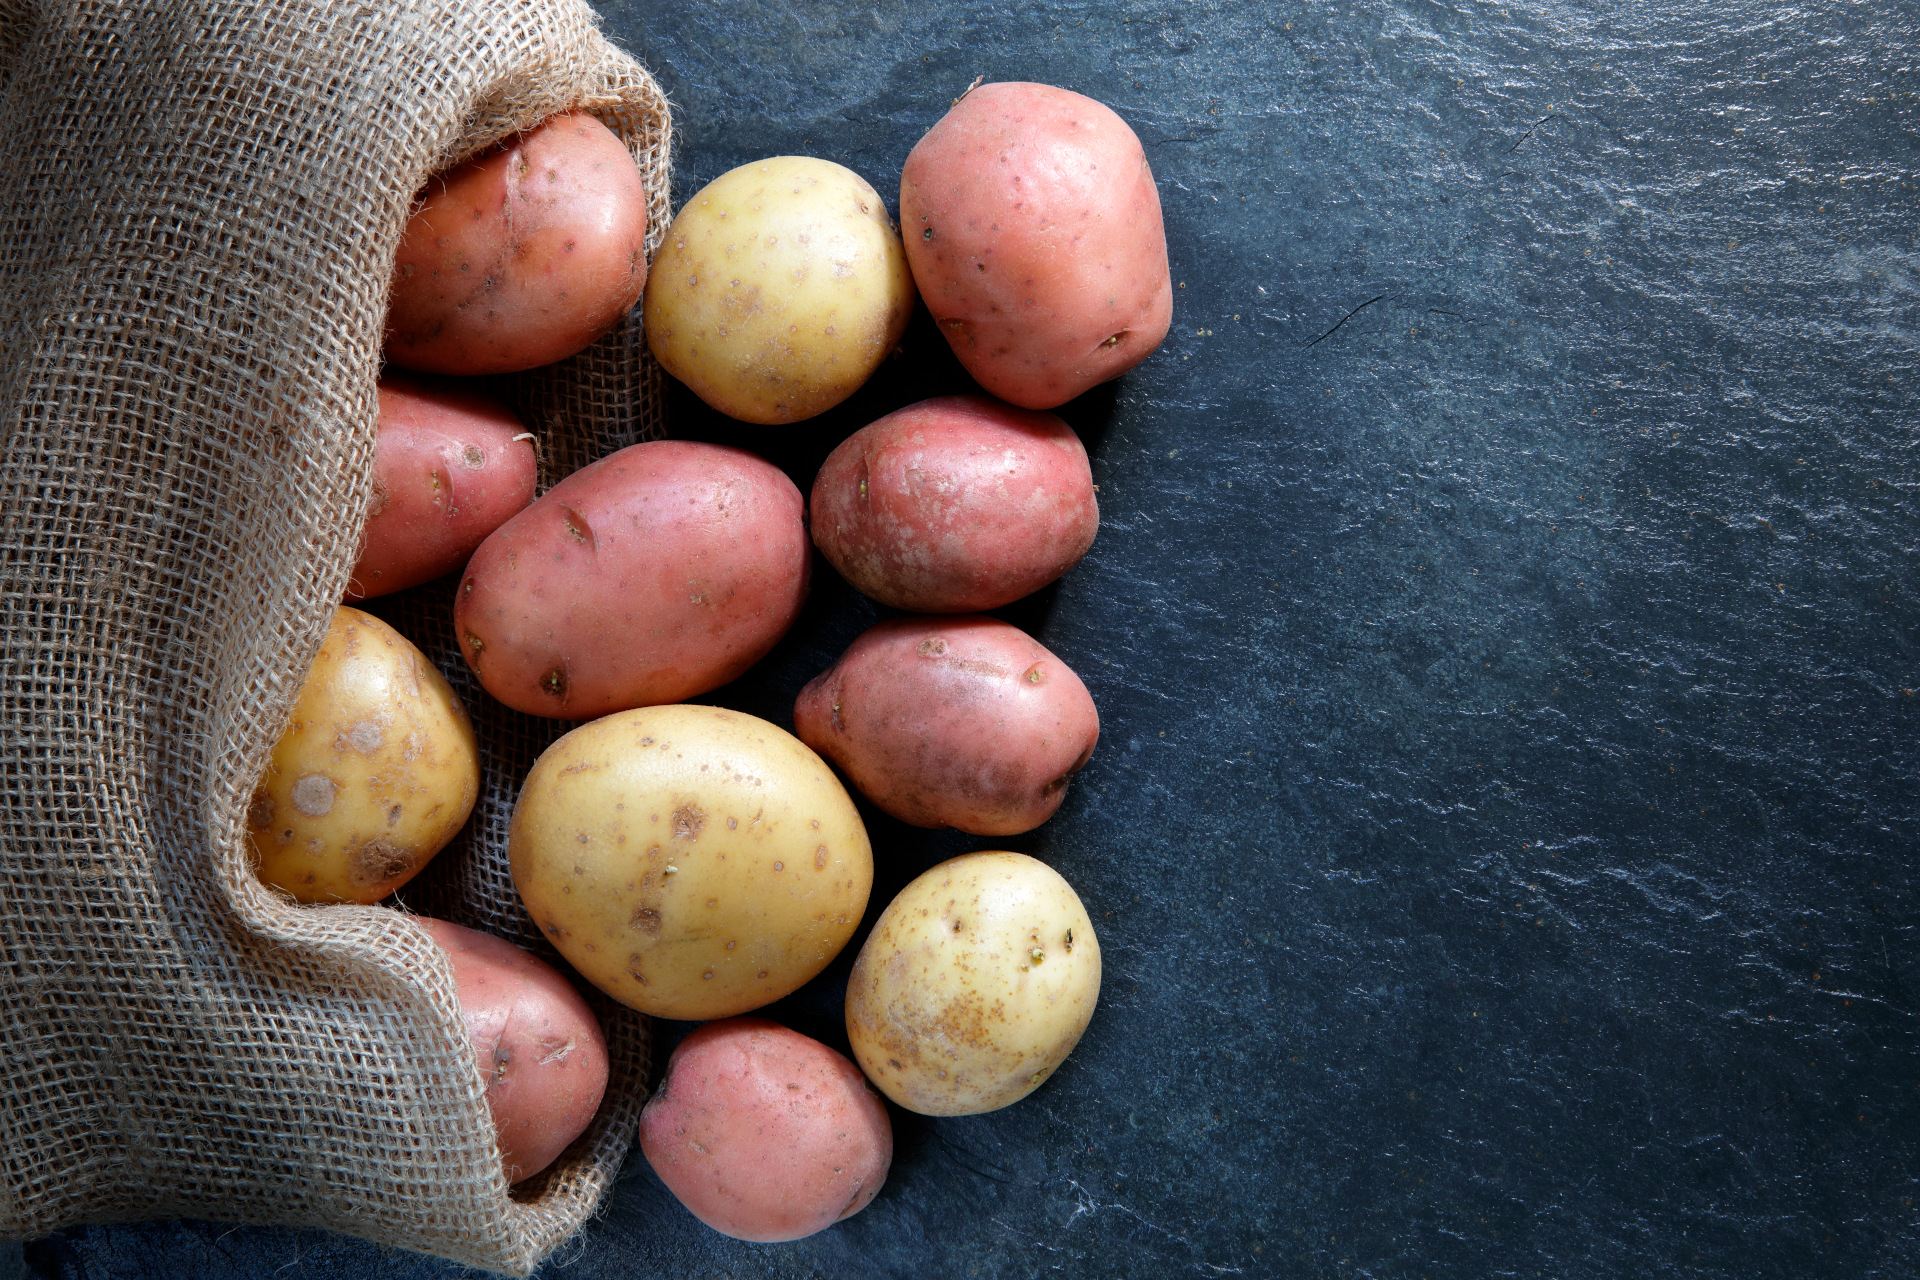 Red and Gold potatoes in hessian sack